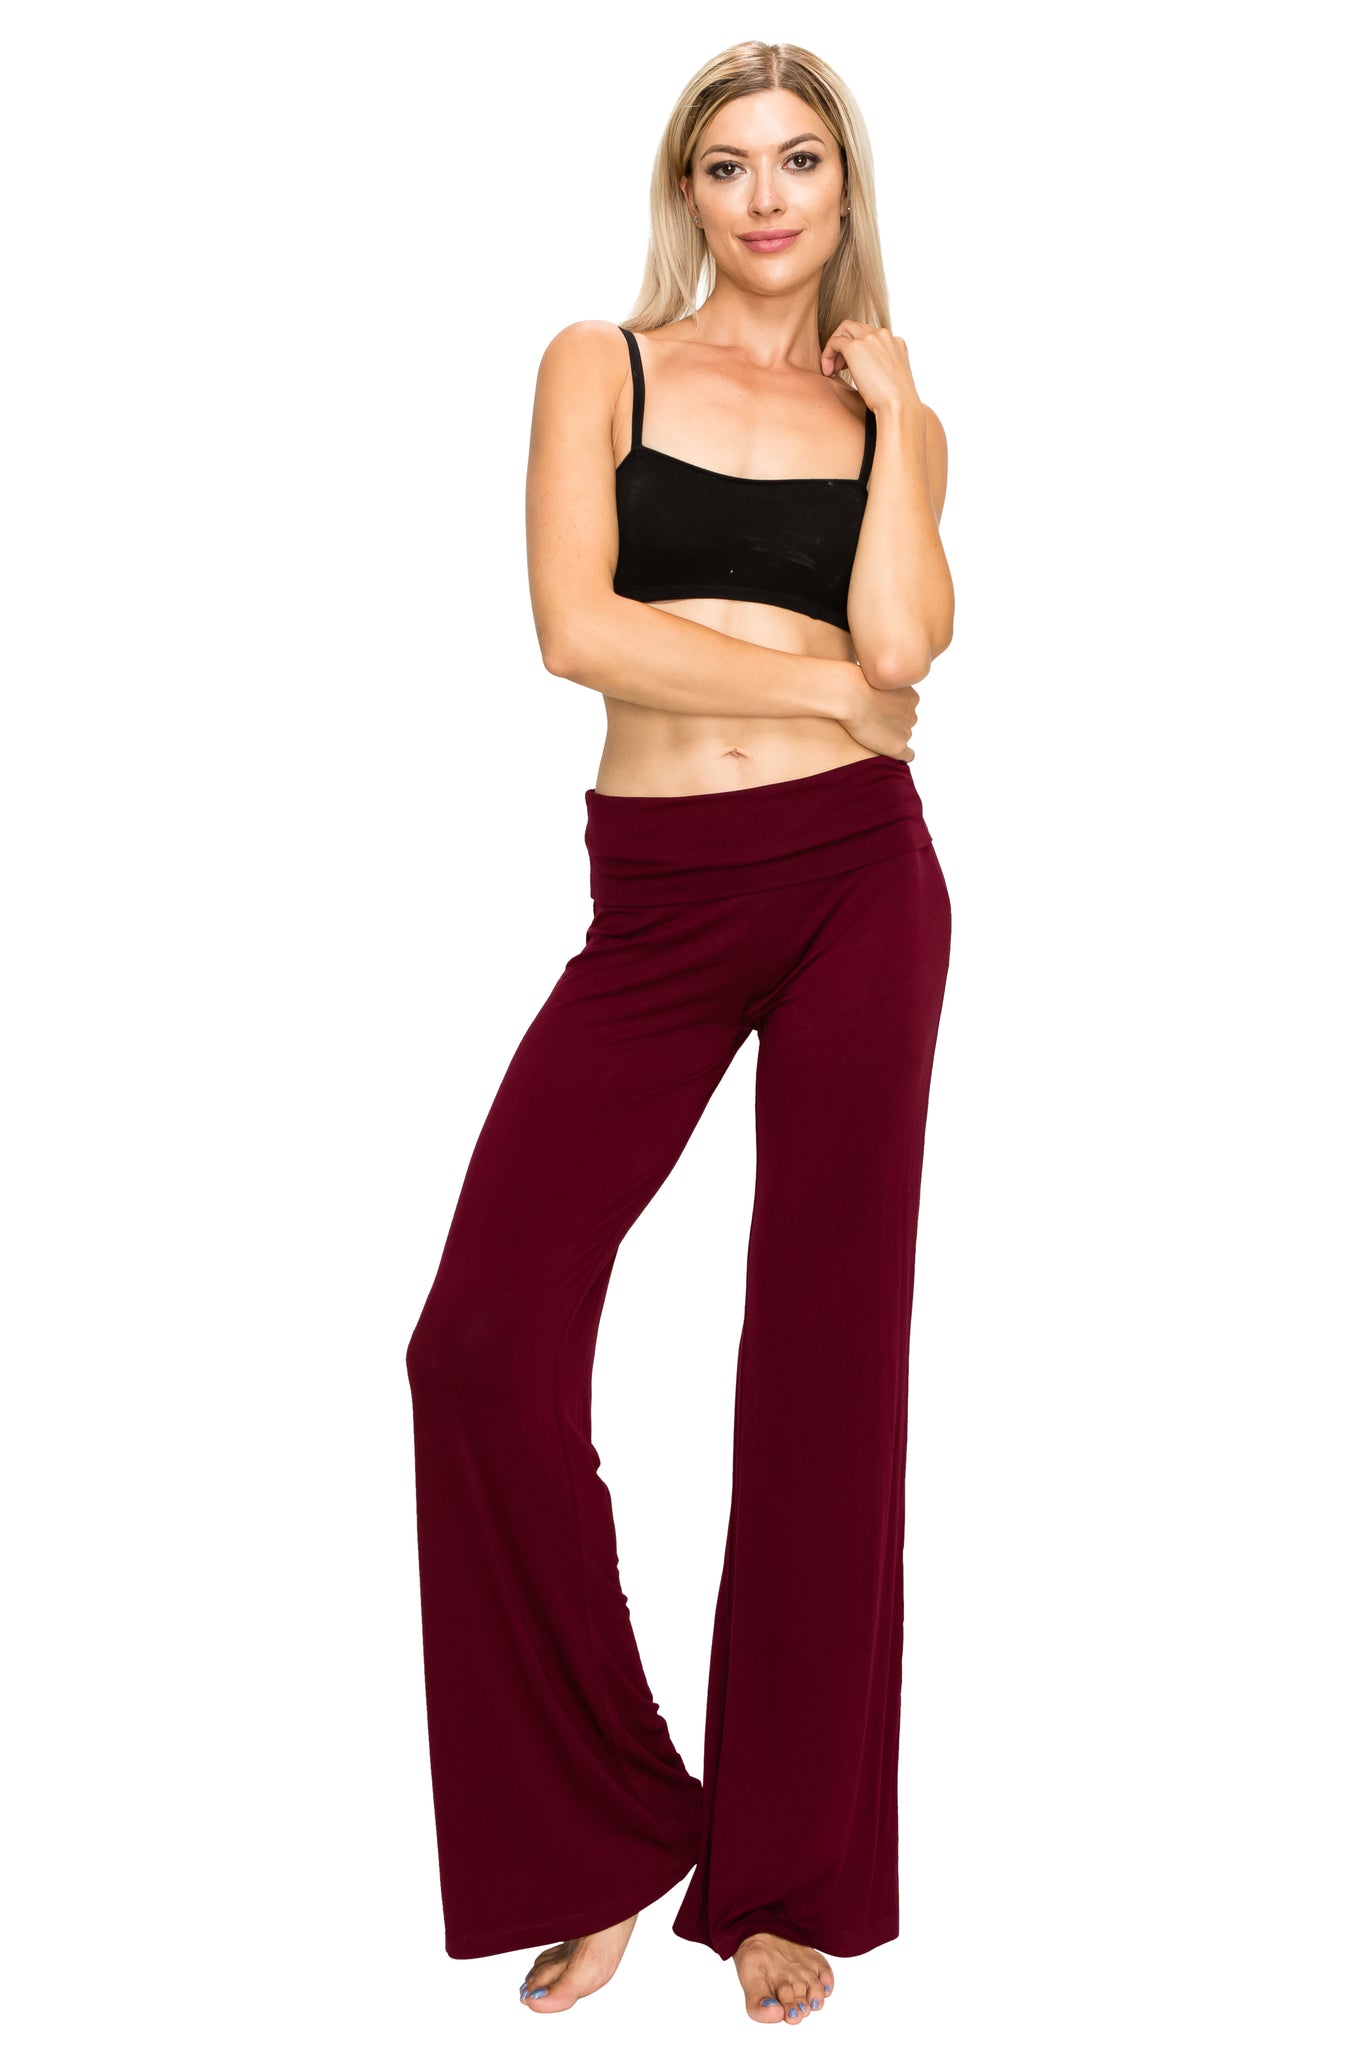 Solid Burgundy Yoga Pants – The Paisley Rooster Boutique